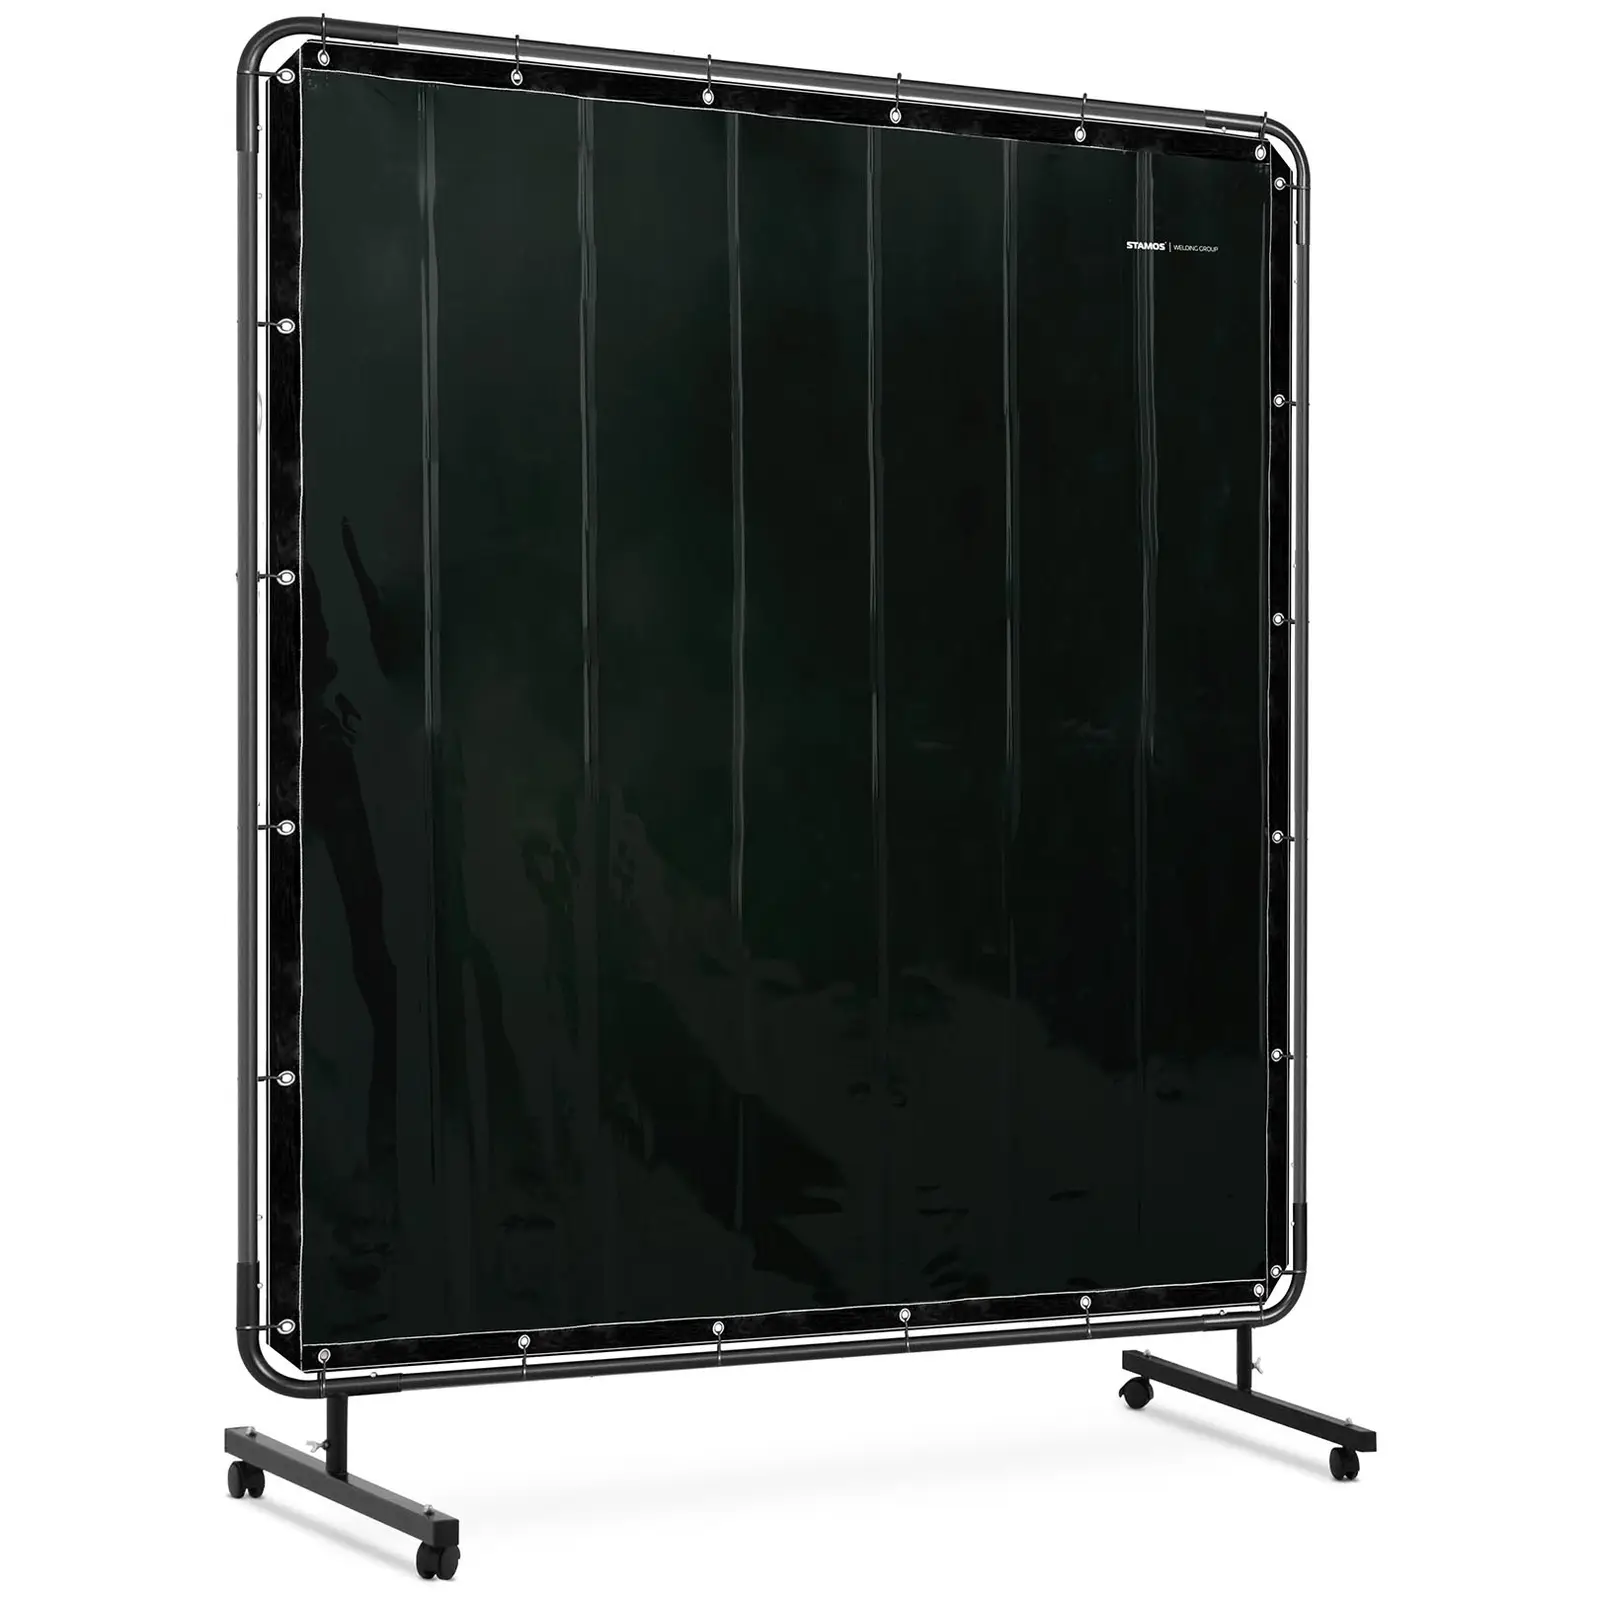 Welding Screen - with frame - 174 x 174 cm